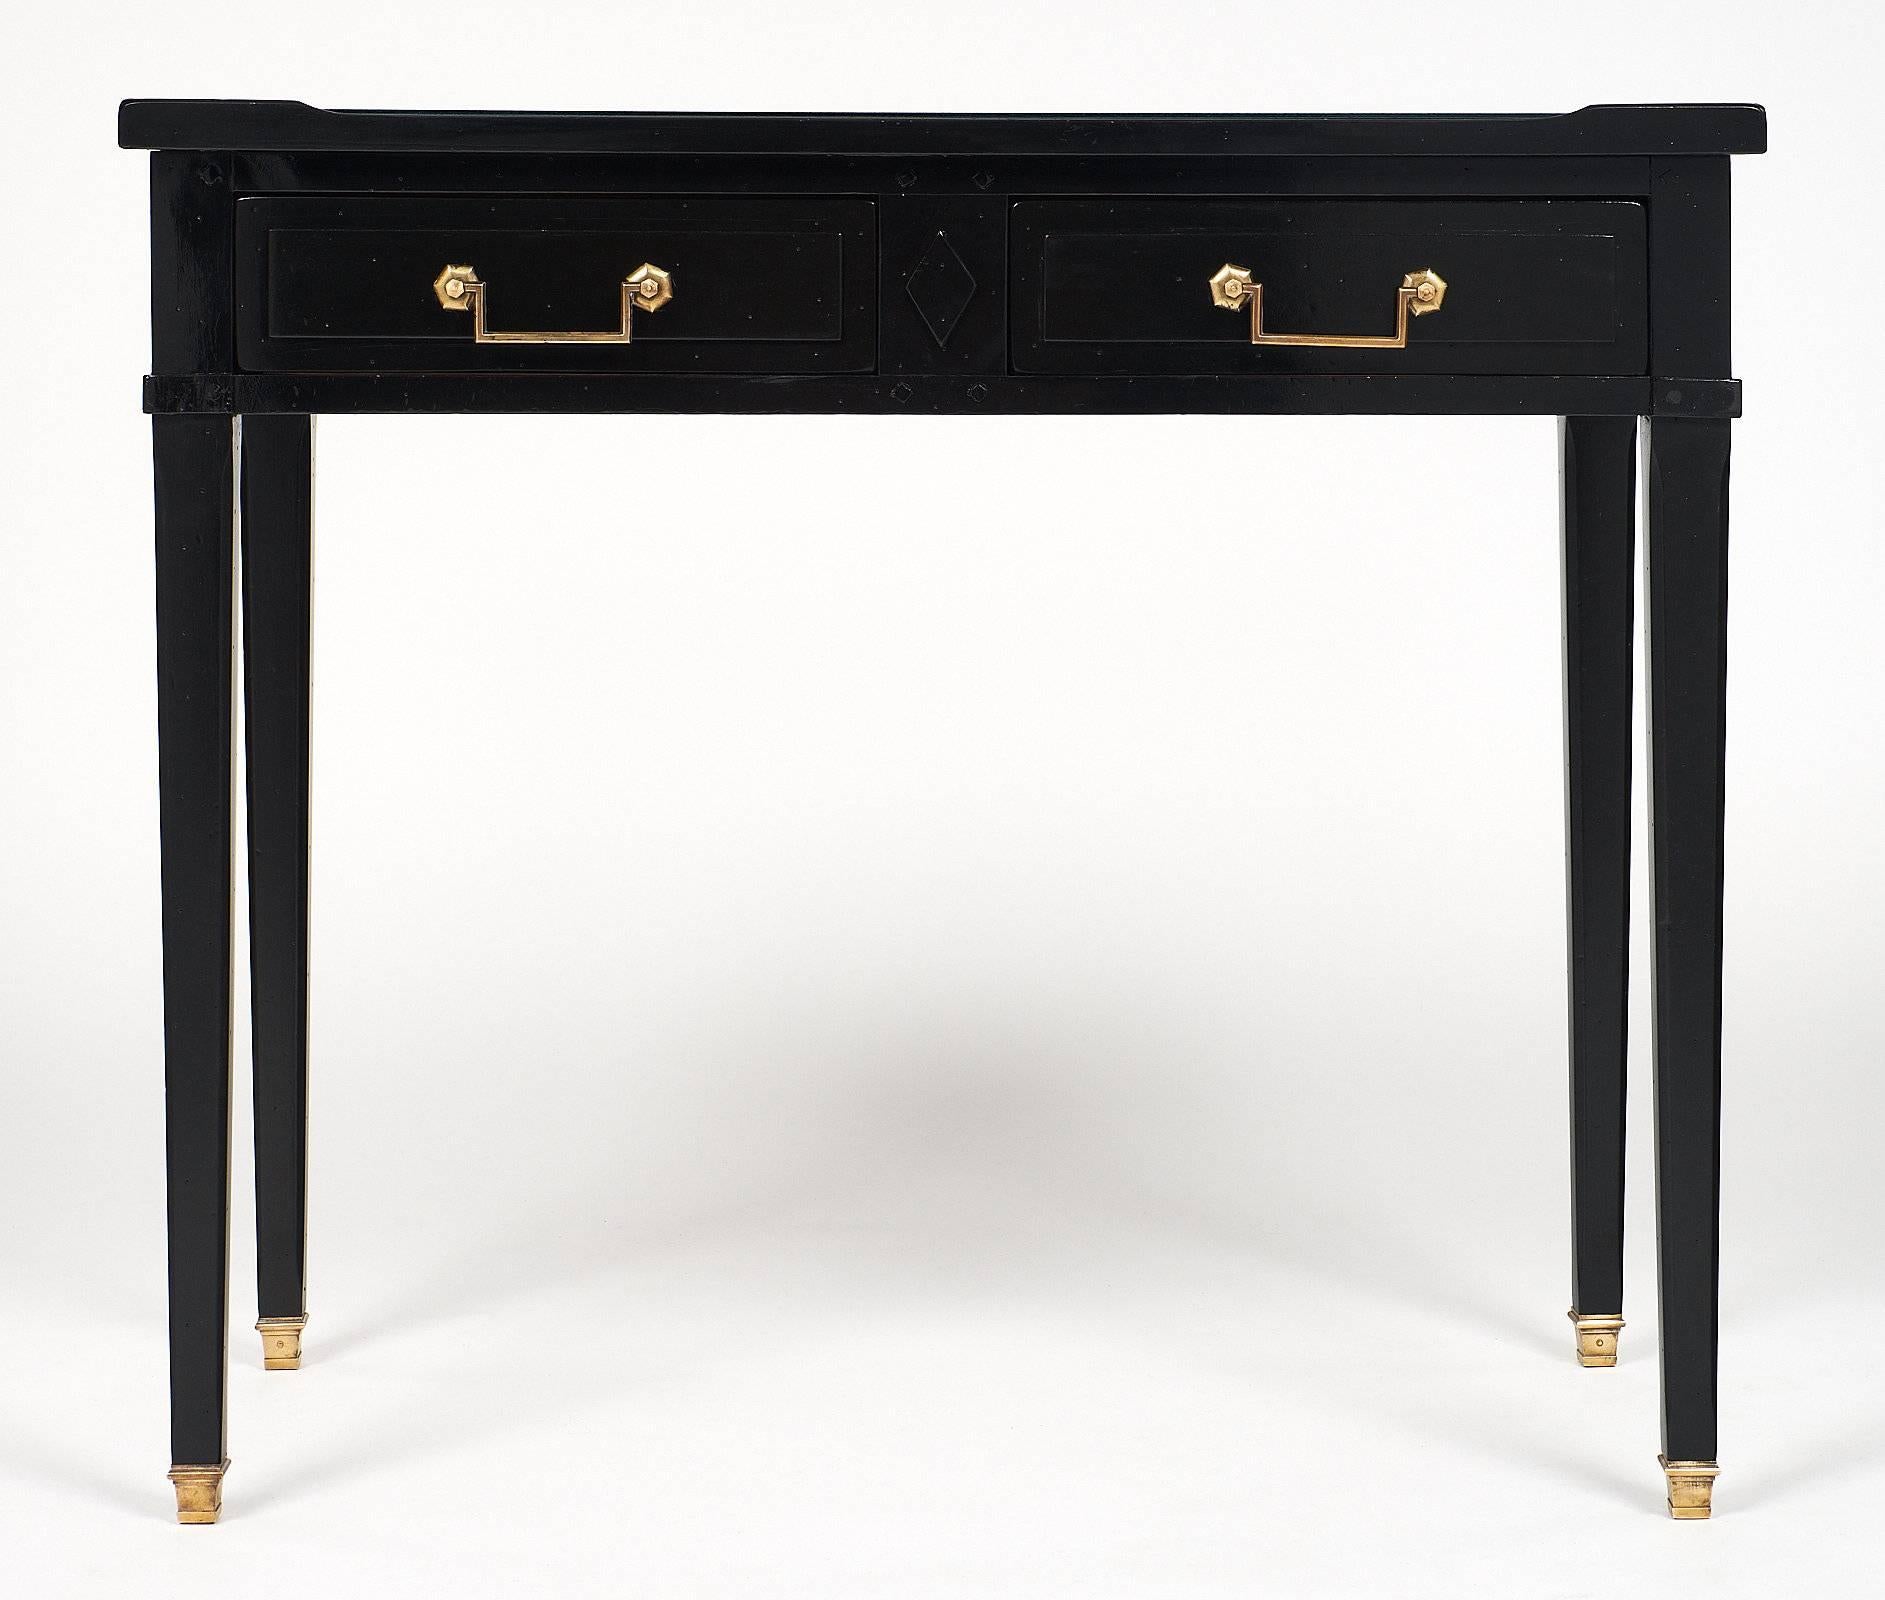 Charming French Louis XVI style writing desk made of ebonized mahogany, and featuring a mirrored top. This desk has two dovetailed drawers with gilt bronze handles and bronze on all four feet. We love the elegance of the tapered legs and paneled